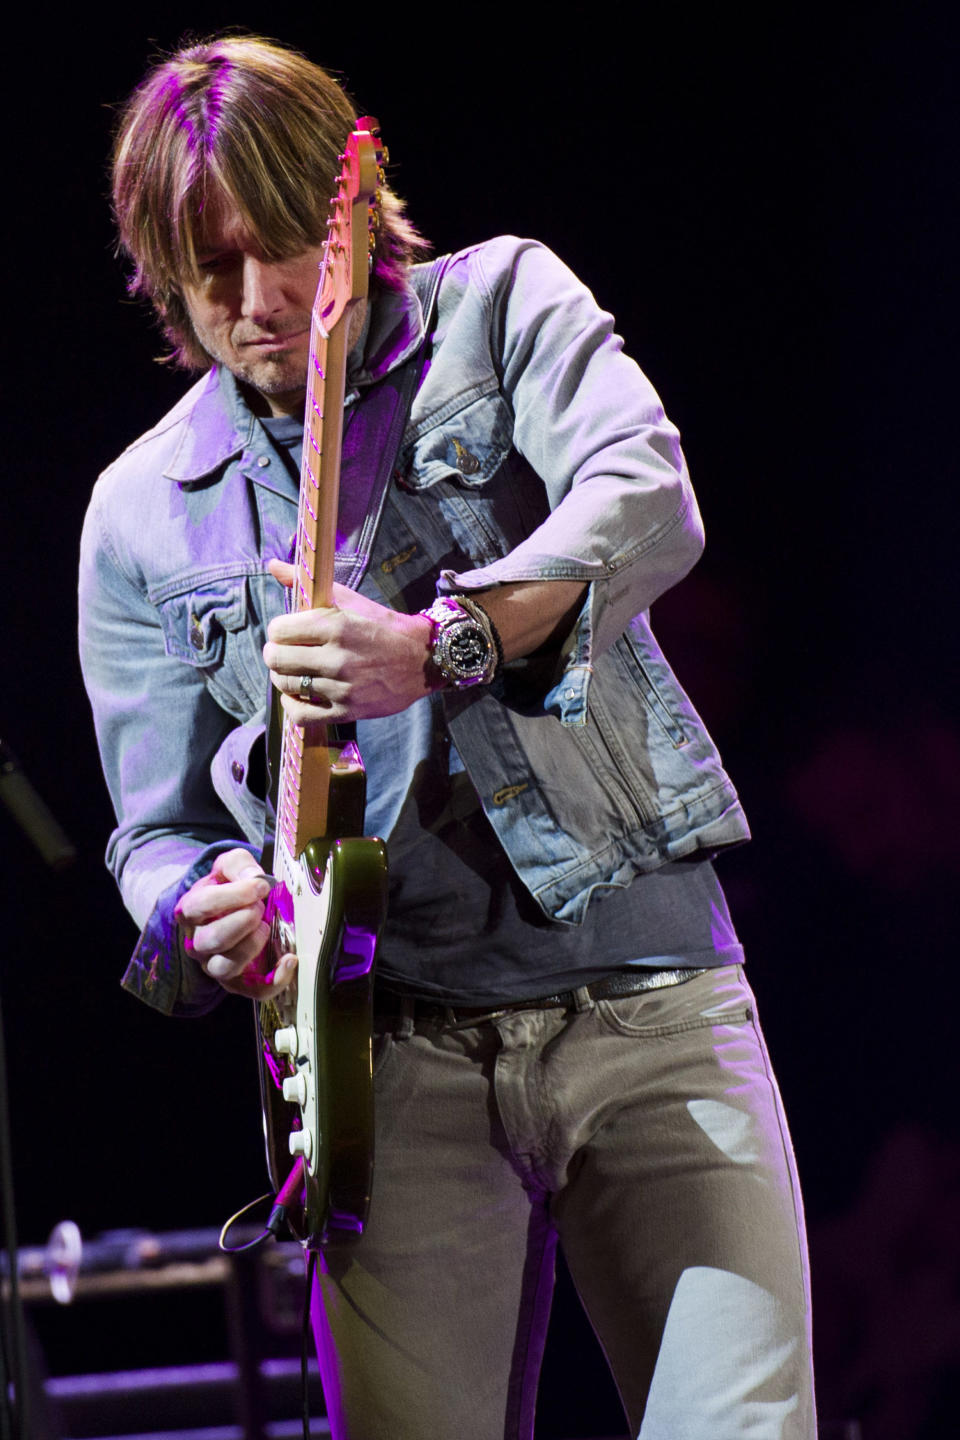 Keith Urban performs at Eric Clapton's Crossroads Guitar Festival 2013 at Madison Square Garden on Saturday, April 13, 2013, in New York. (Photo by Charles Sykes/Invision/AP)